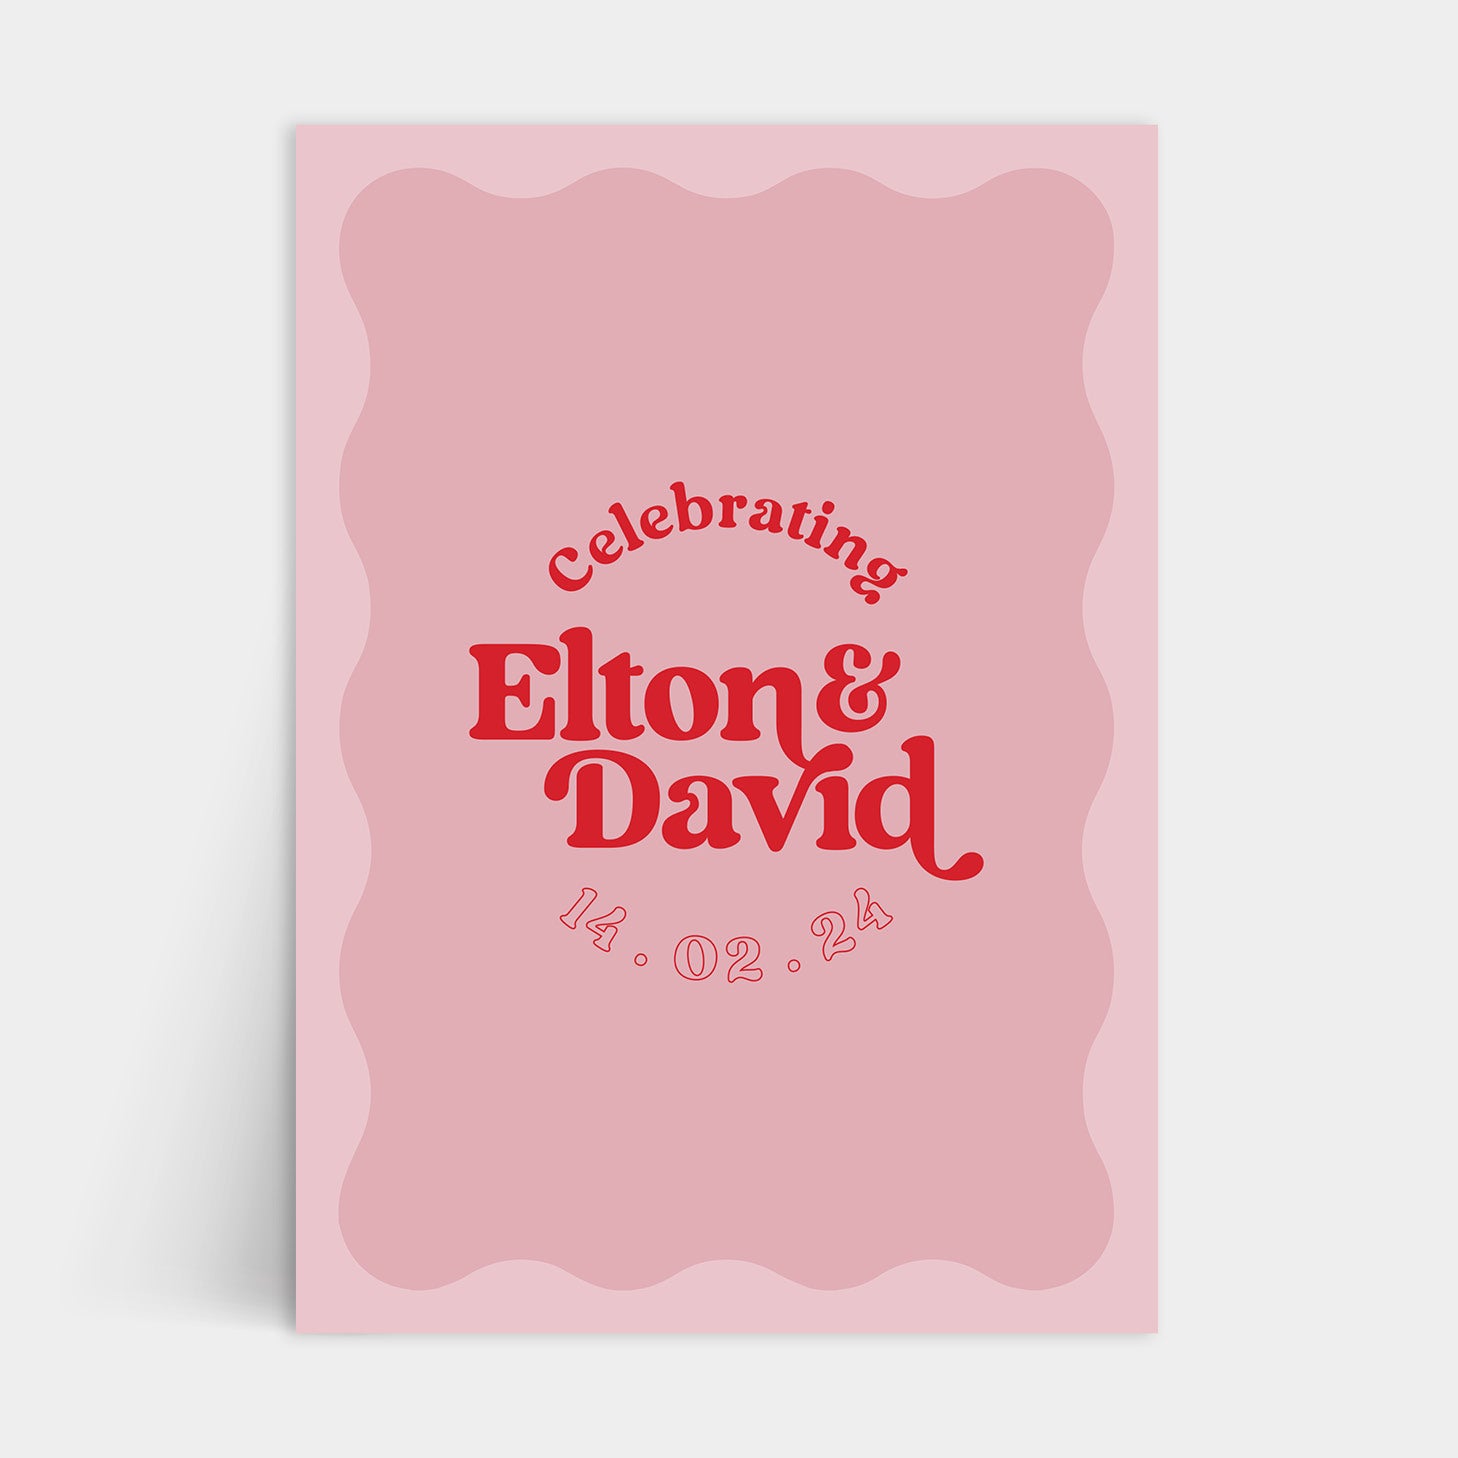 ELTON DUO SIGN PACKAGE